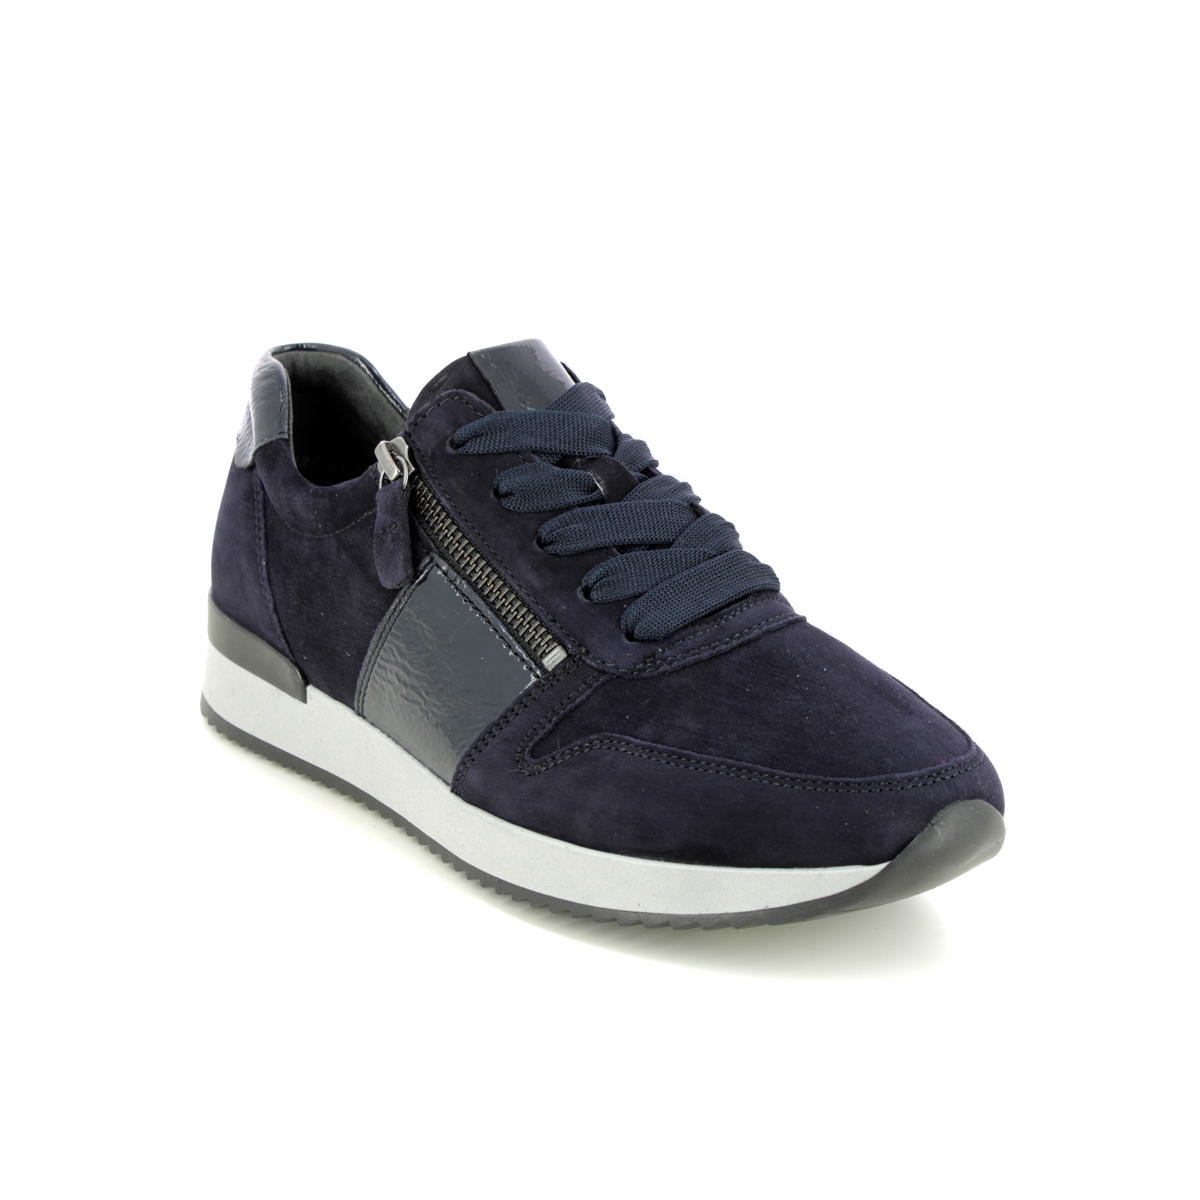 Gabor Lulea Navy suede Womens trainers 93.420.96 in a Plain Leather and Man-made in Size 3.5